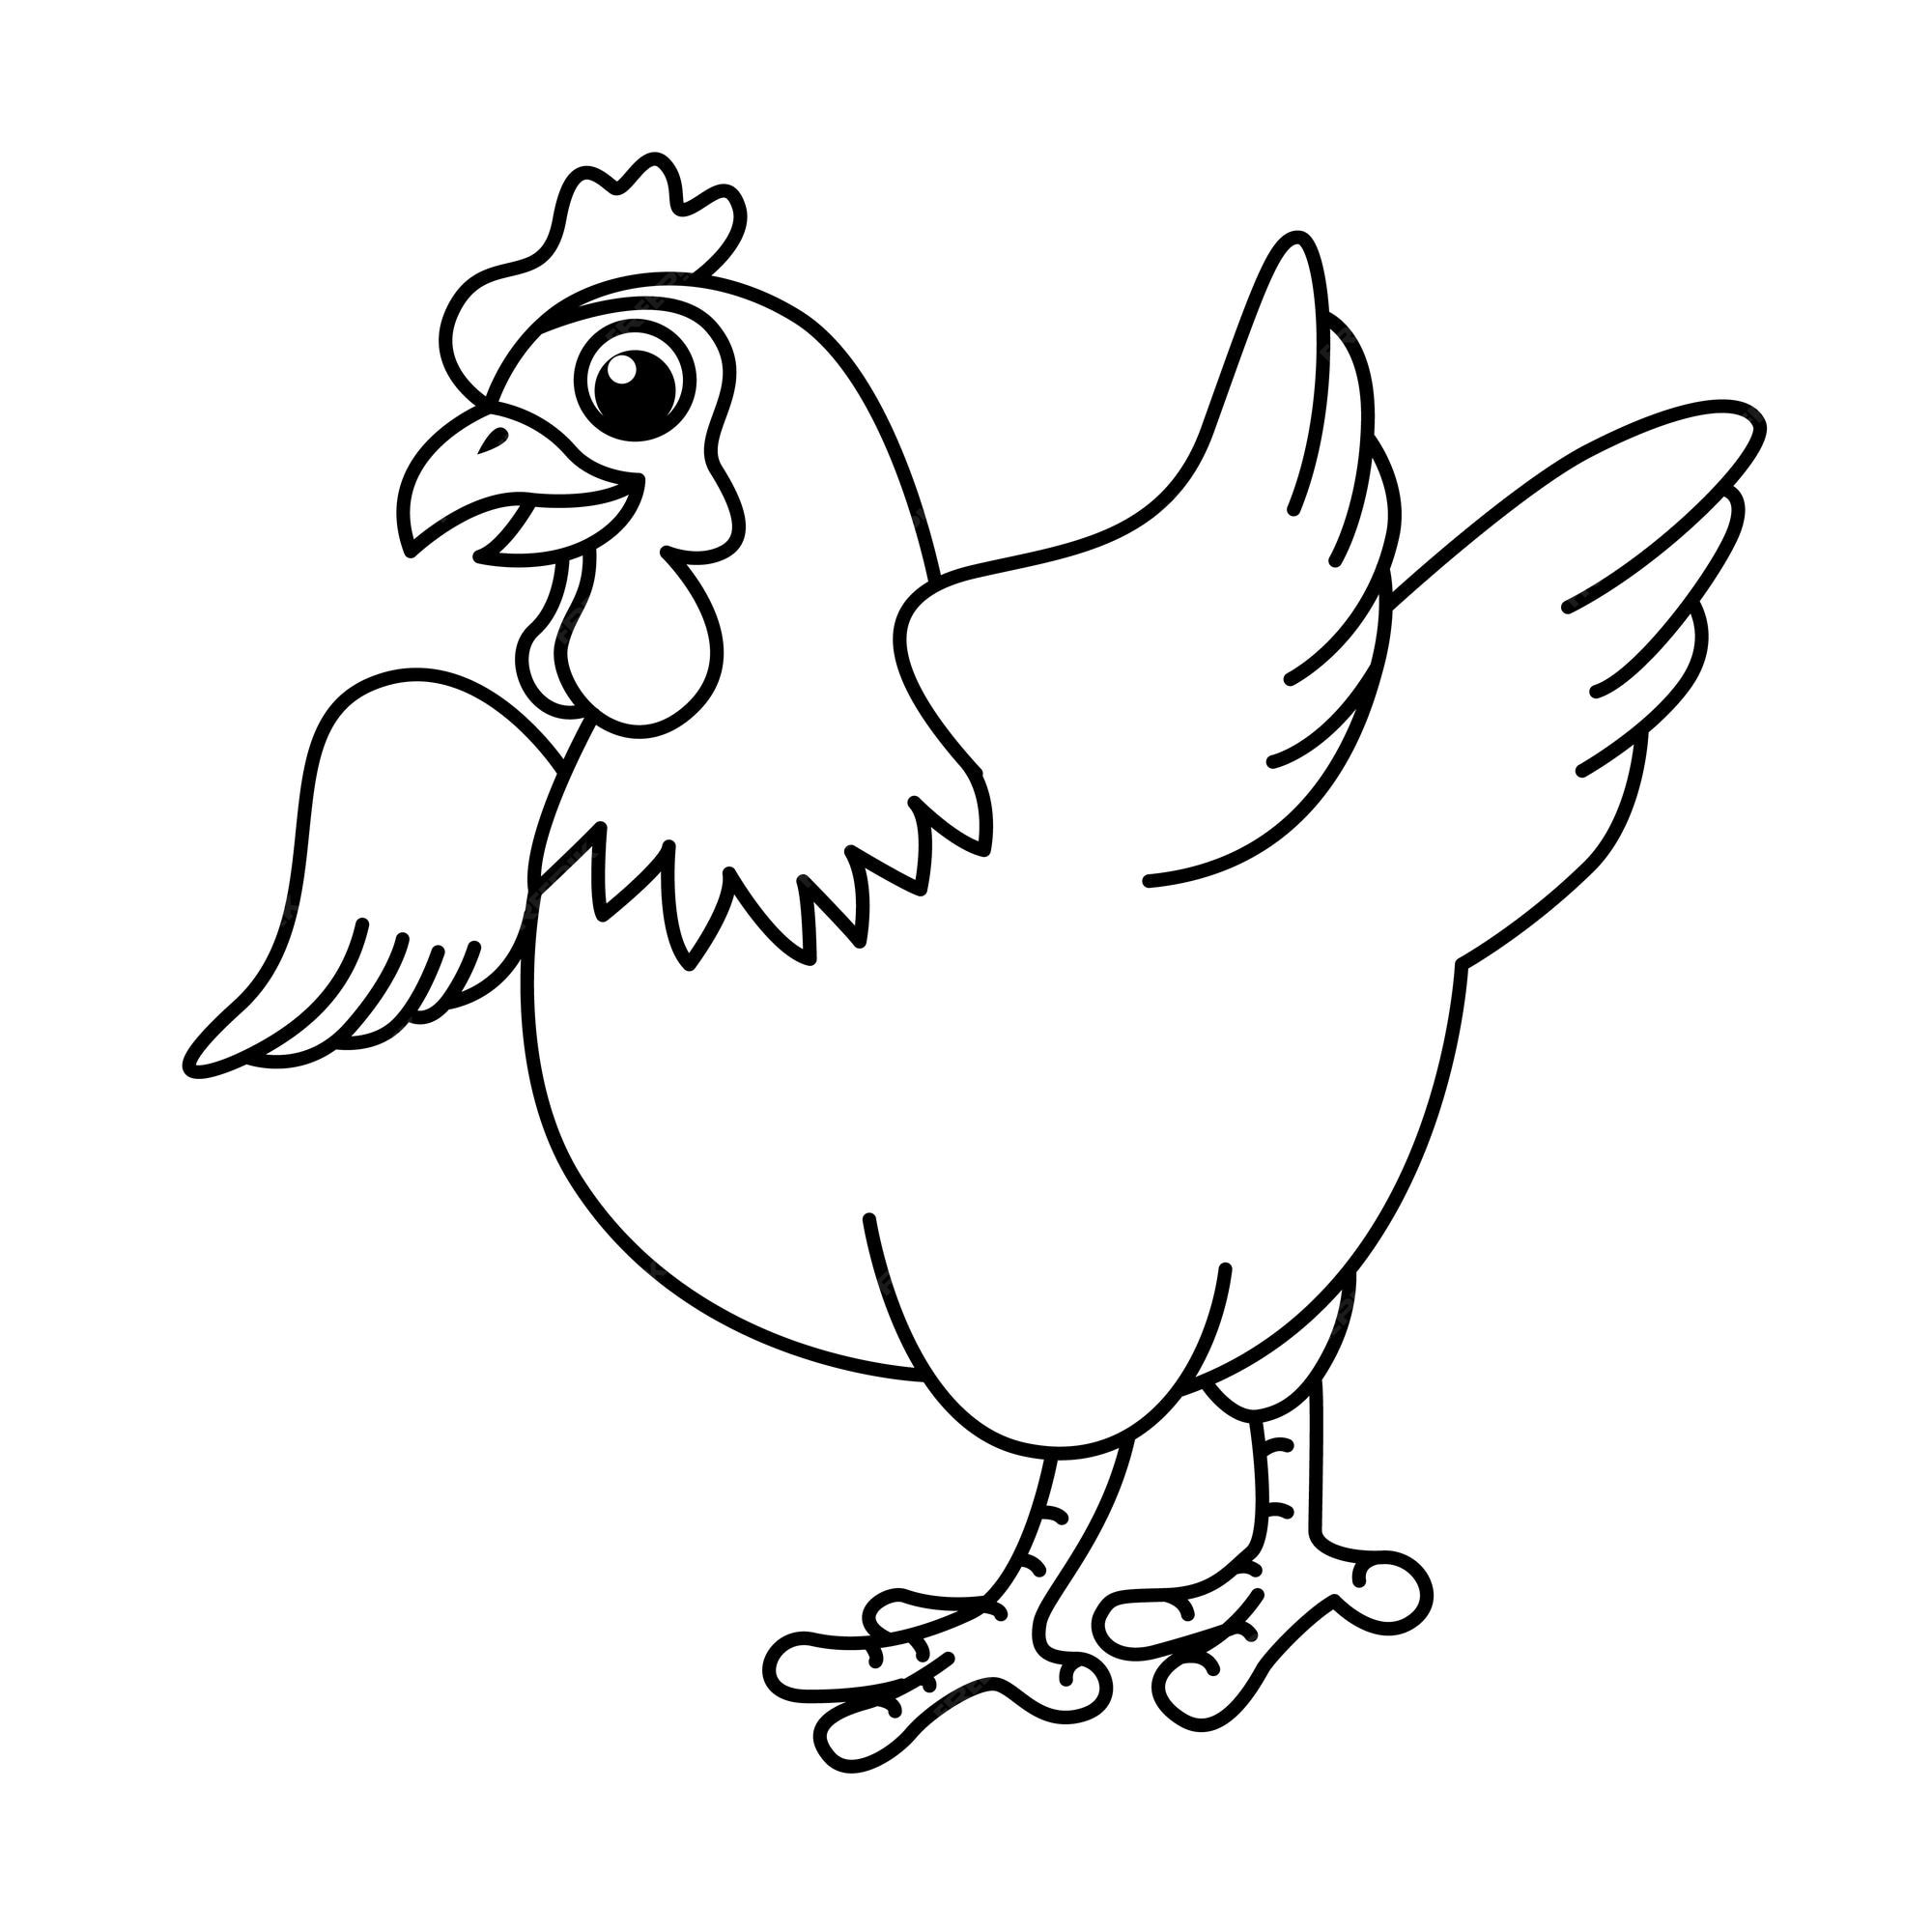 Premium Vector | Funny chickens cartoon characters vector illustration for  kids coloring book